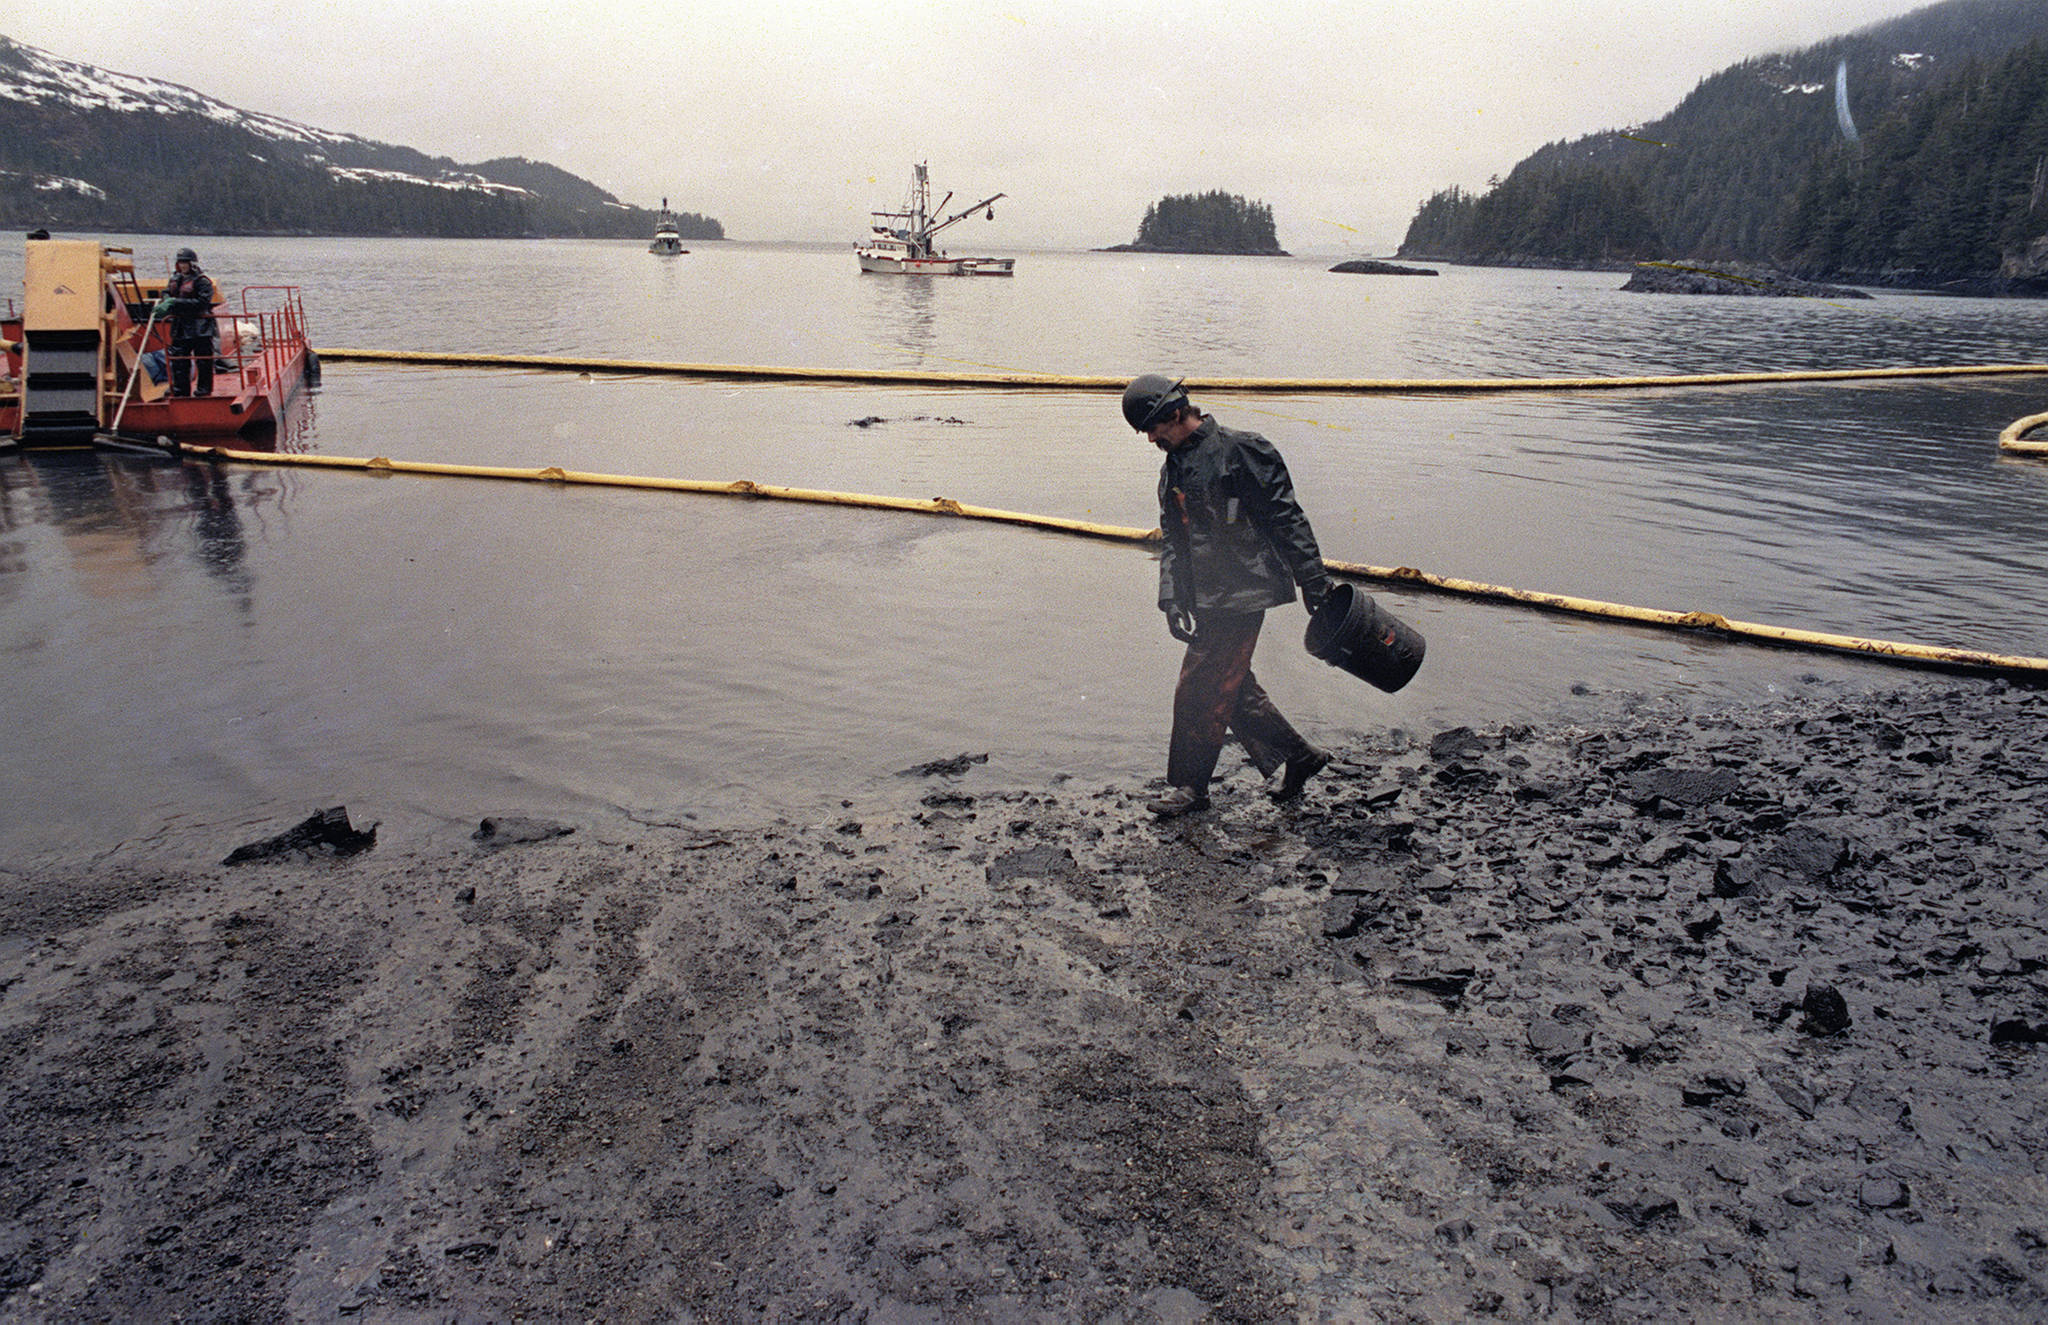 In this April 17, 1989 photo, a worker makes his way across the polluted shore of Block Island, Alaska, as efforts are underway to test techniques to clean up the oil spill of the tanker Exxon Valdez in Prince William Sound. The Exxon Valdez tanker struck Alaska’s Bligh Reef on March 24, 1989, while bound for California. It spilled about 11 million gallons of crude oil, which storms and currents smeared across about 1,300 miles of shoreline. (John Gaps III | Associated Press File)